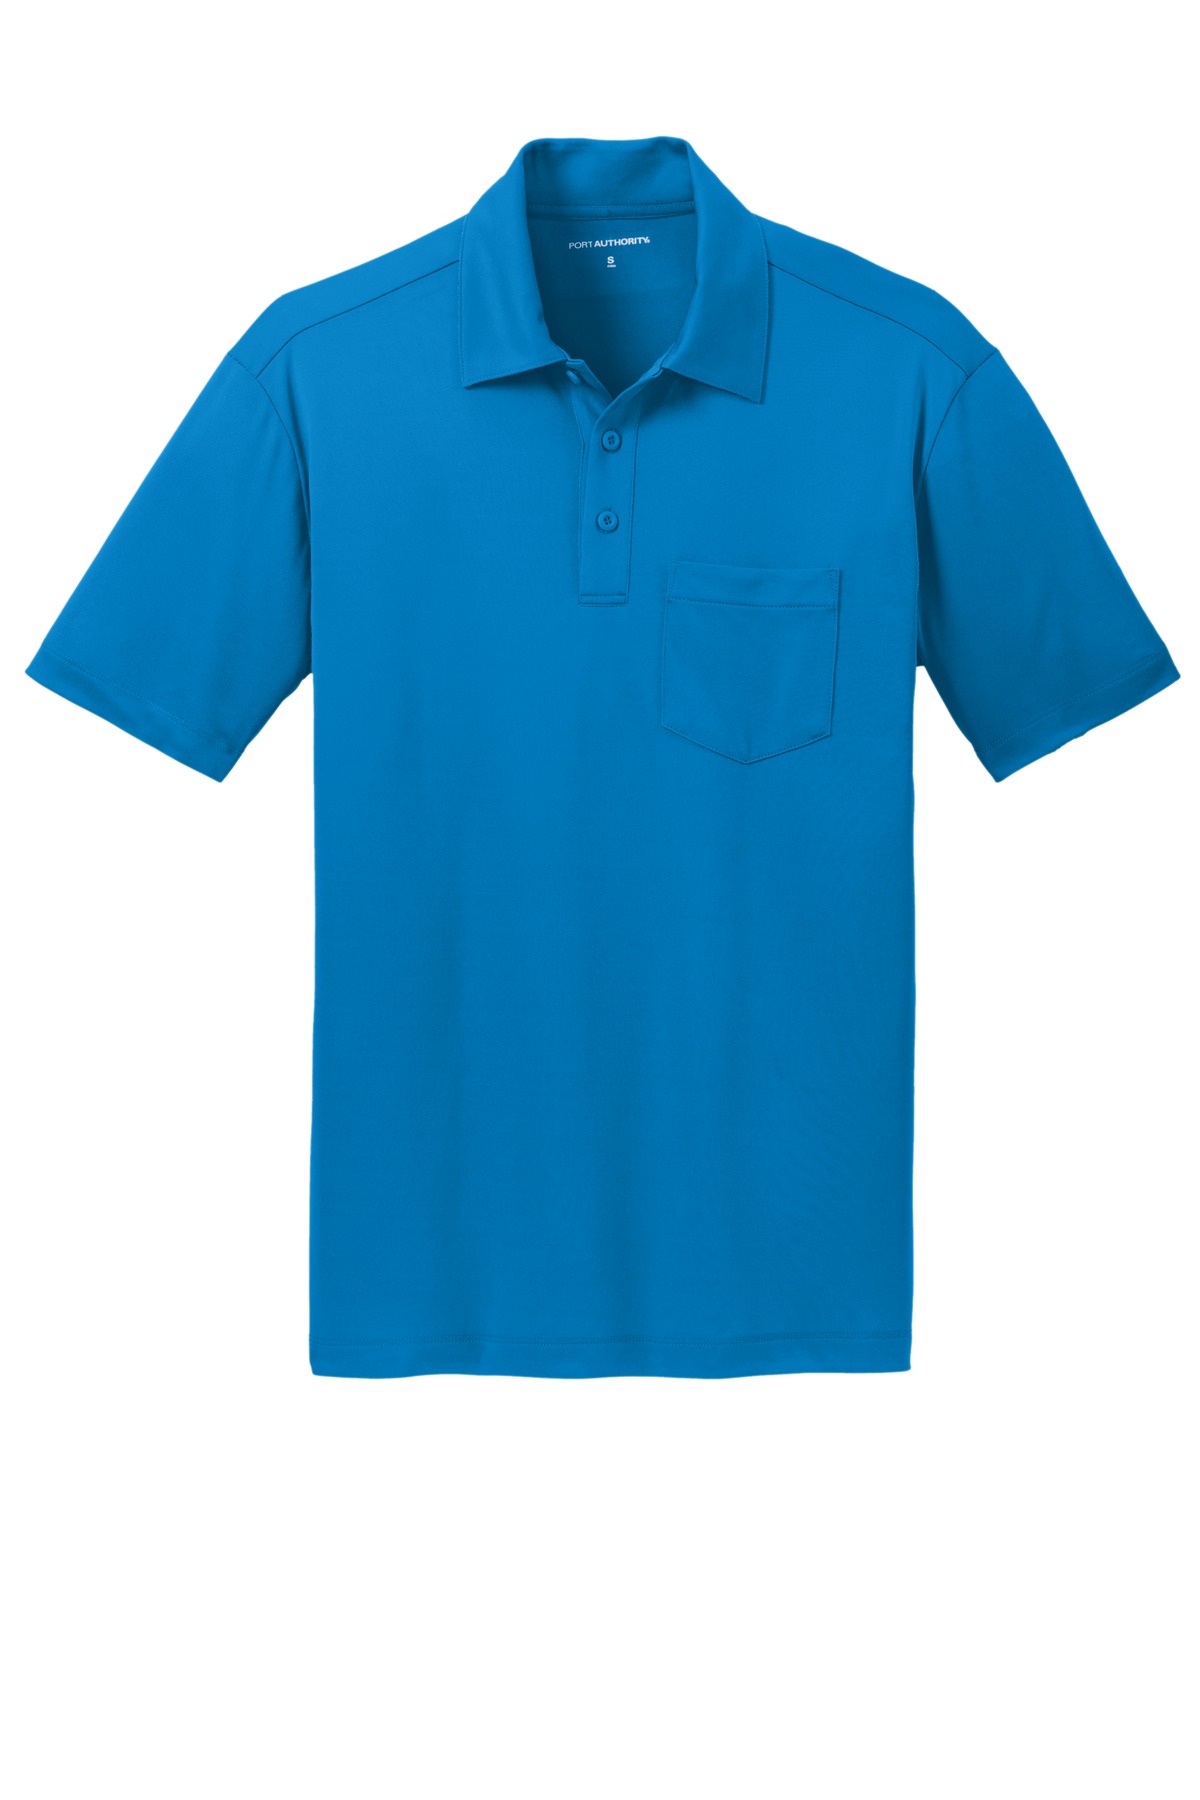 Silk Touch Performance Pocket Polo - K540P